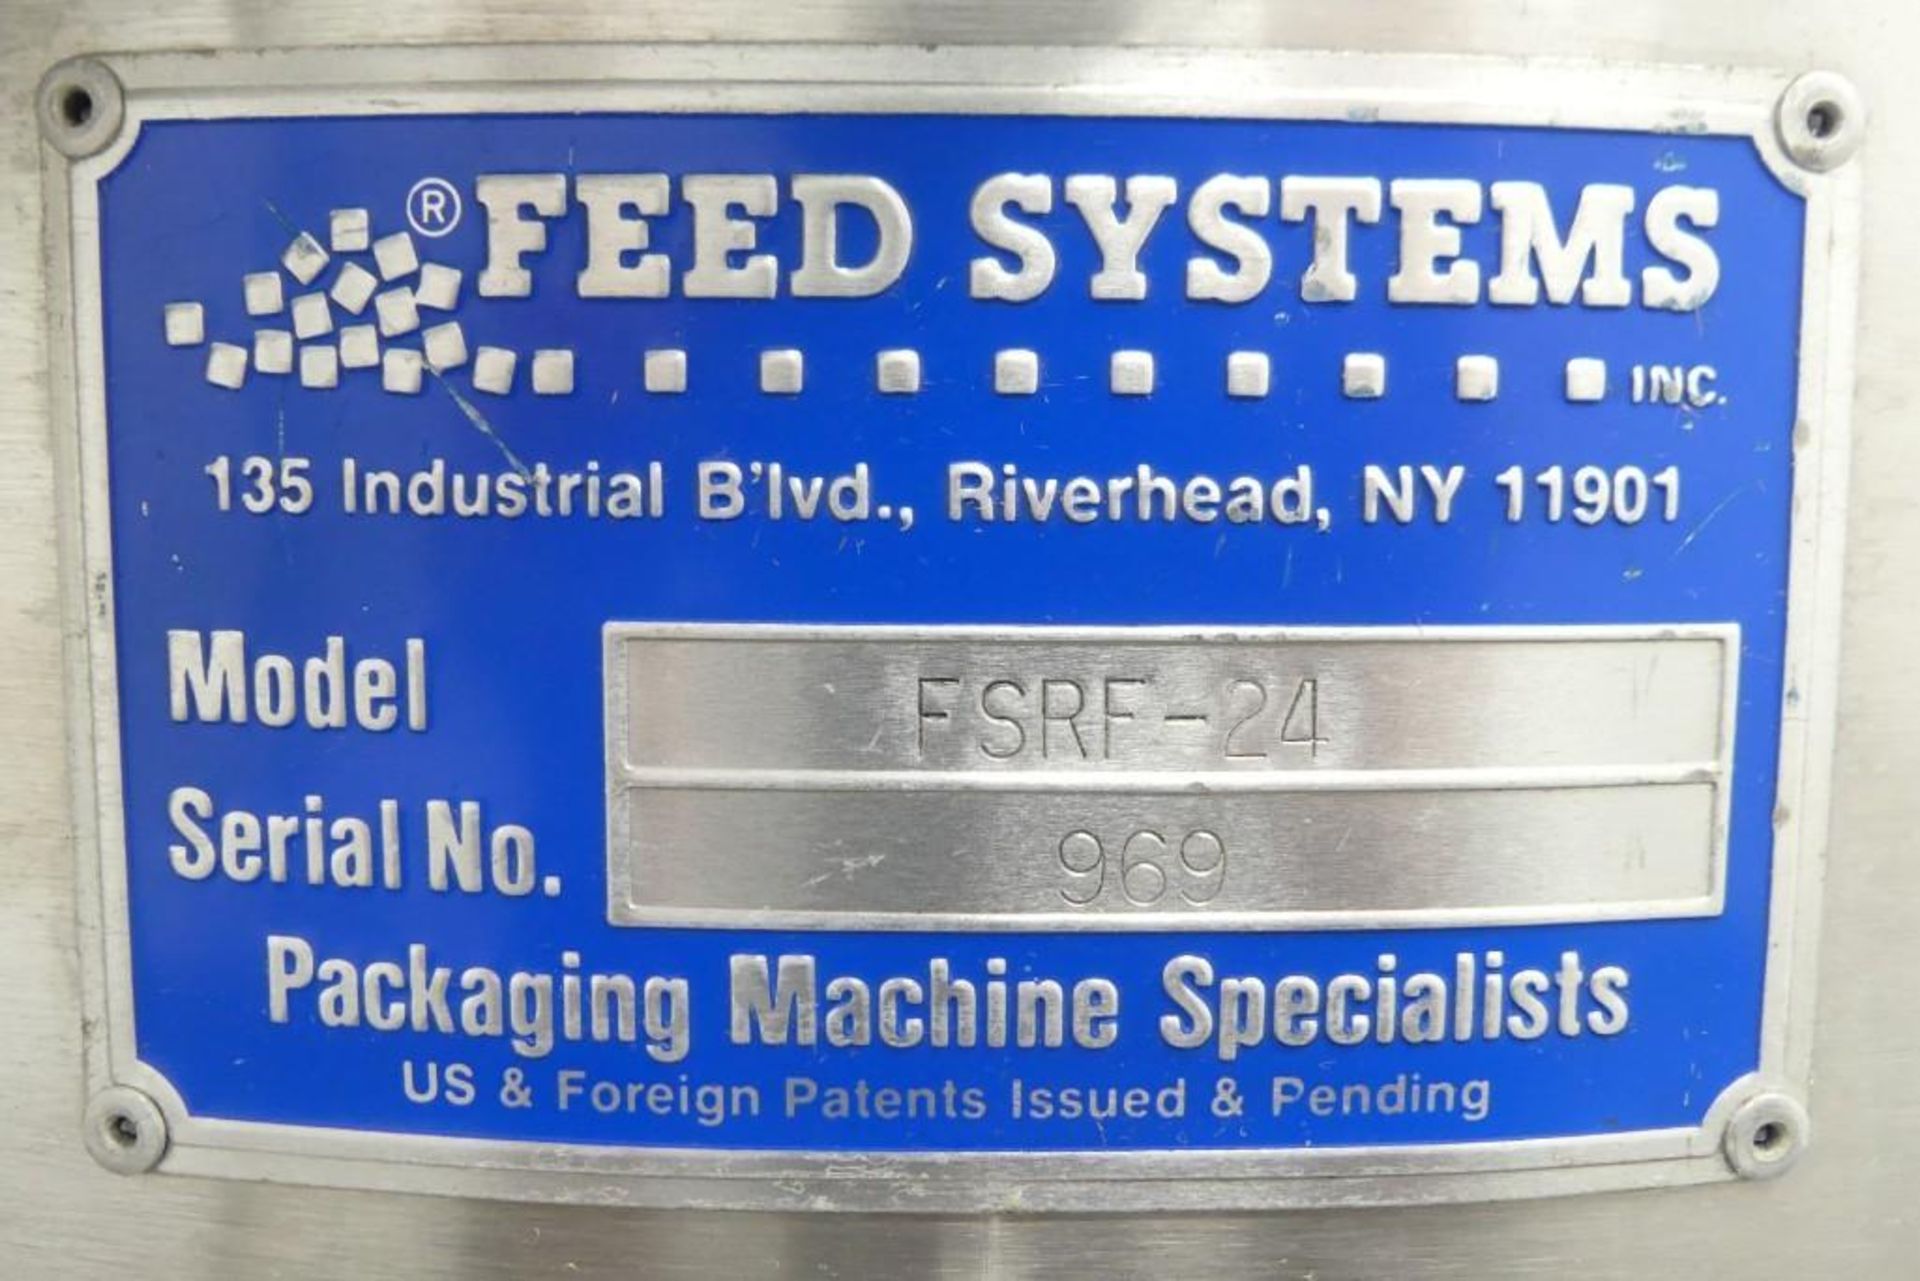 Kaps-All Model E4 Spindle Capper with a Feed Systems FSRF-24 Cap Feeder - Image 33 of 35